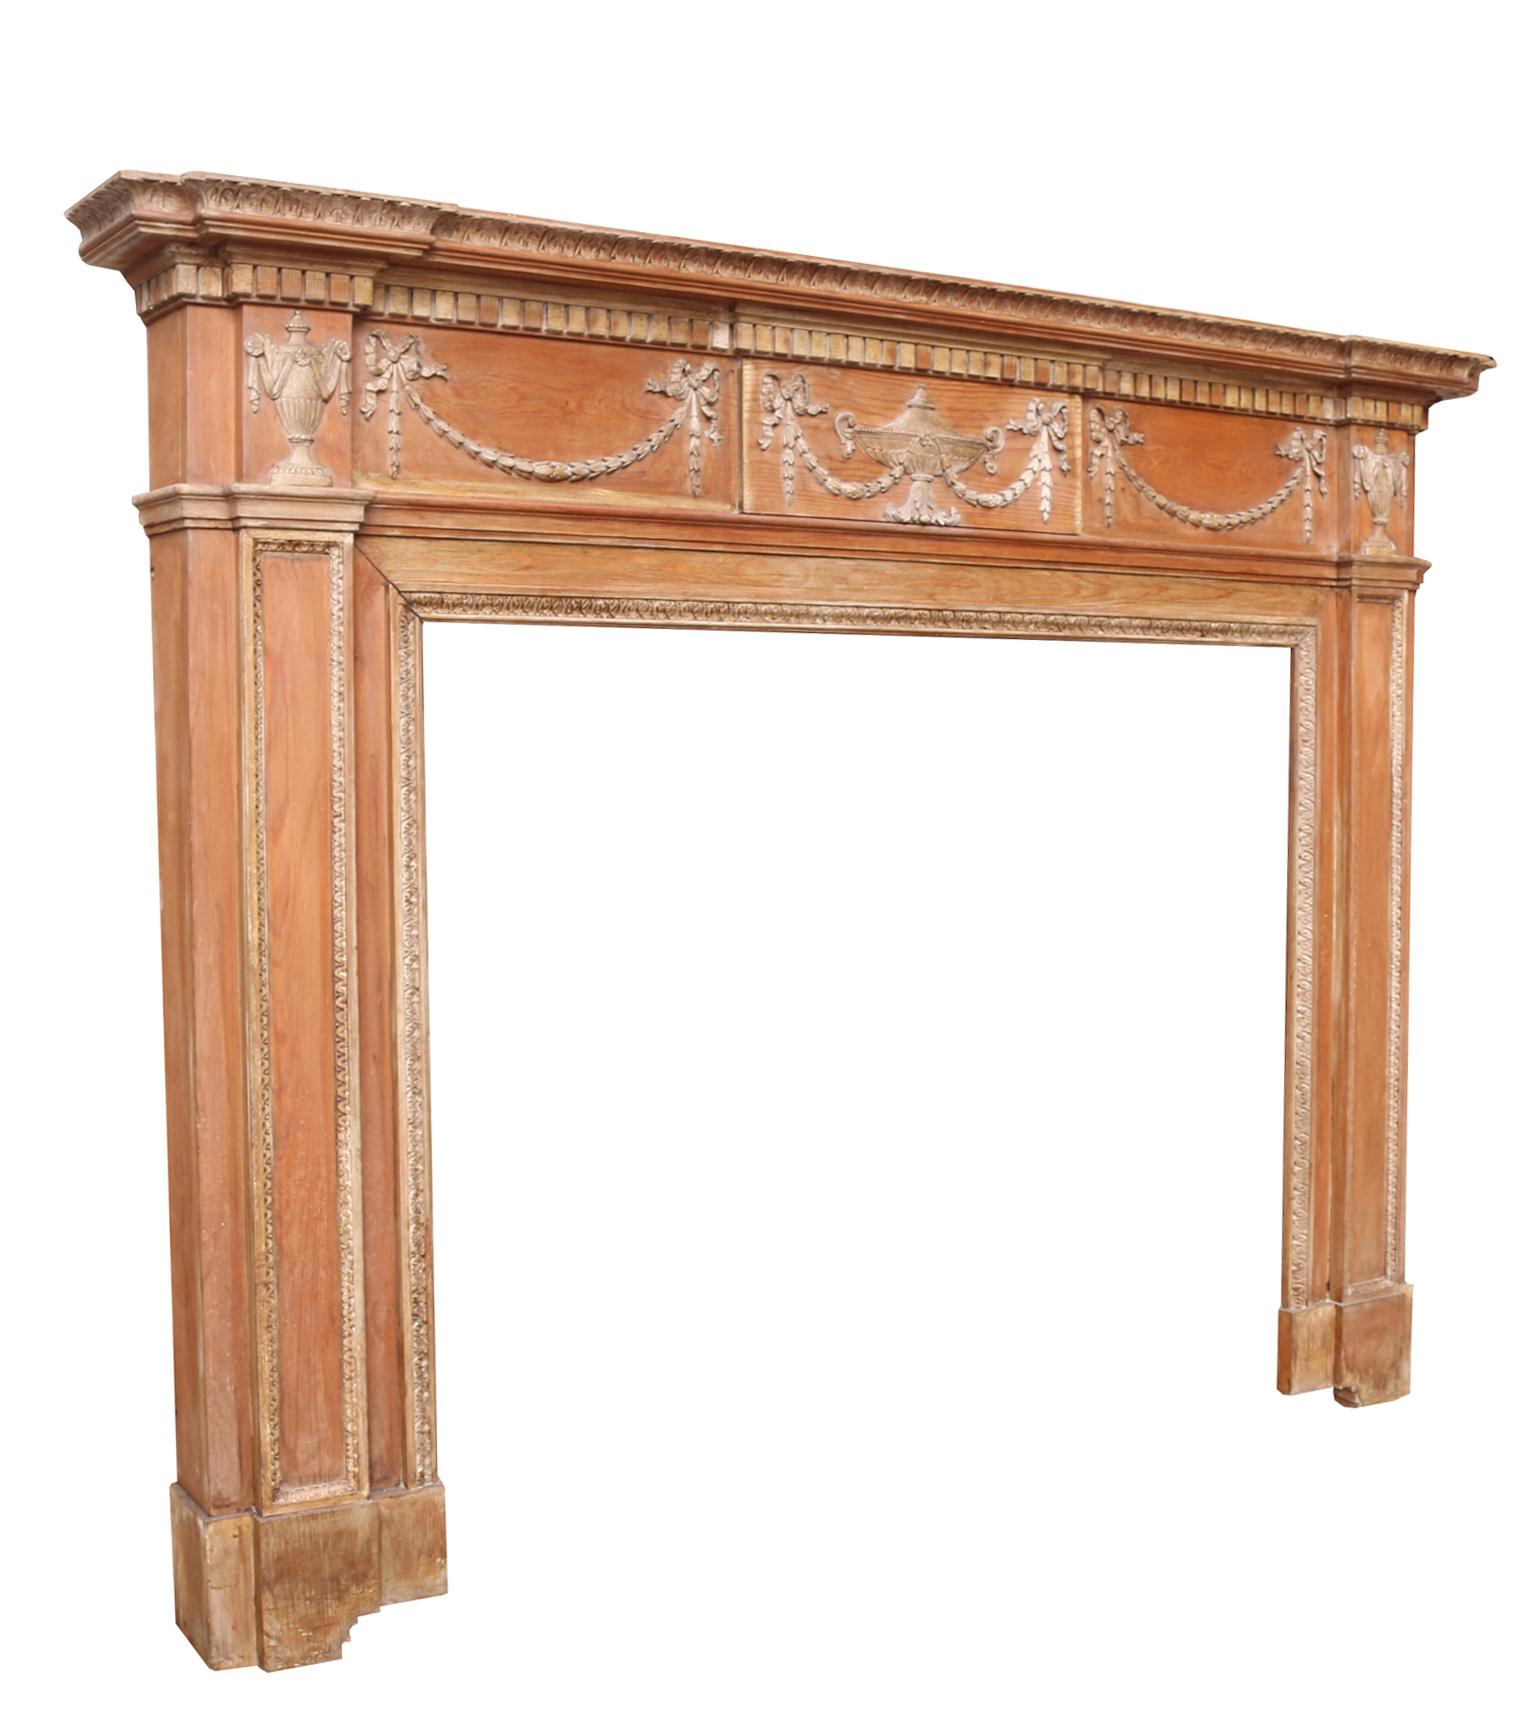 Hand-Carved Georgian Style Carved Pine Fire Surround, circa 1900